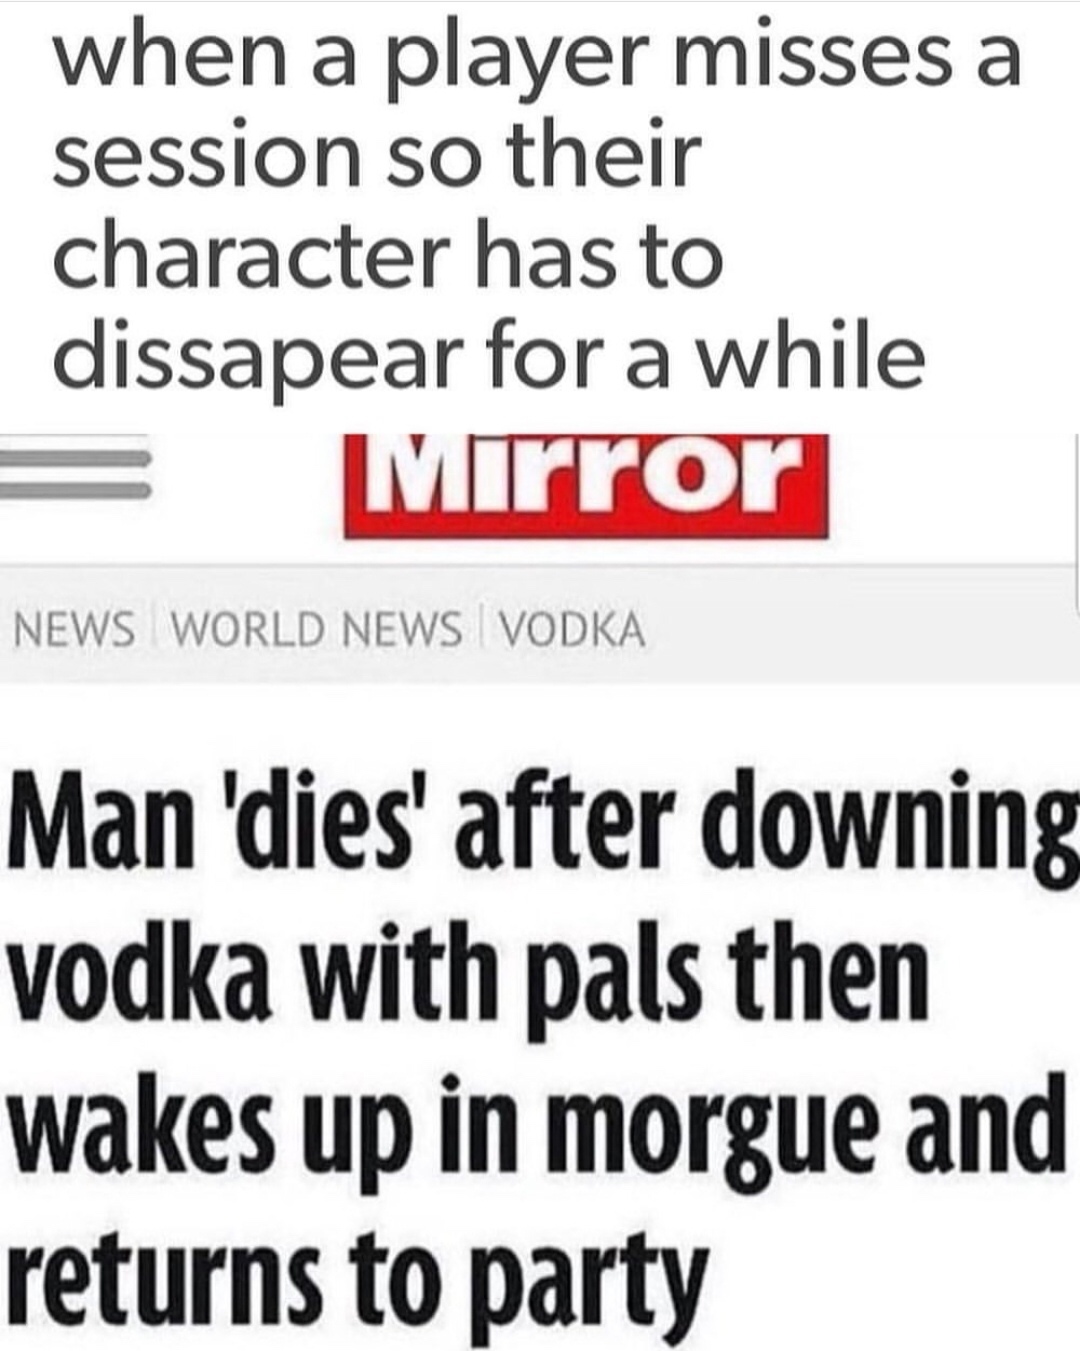 dungeons and dragons memes - when a player misses a session so their character has to dissapear for a while Mirror News World News Vodka Man 'dies' after downing vodka with pals then wakes up in morgue and returns to party